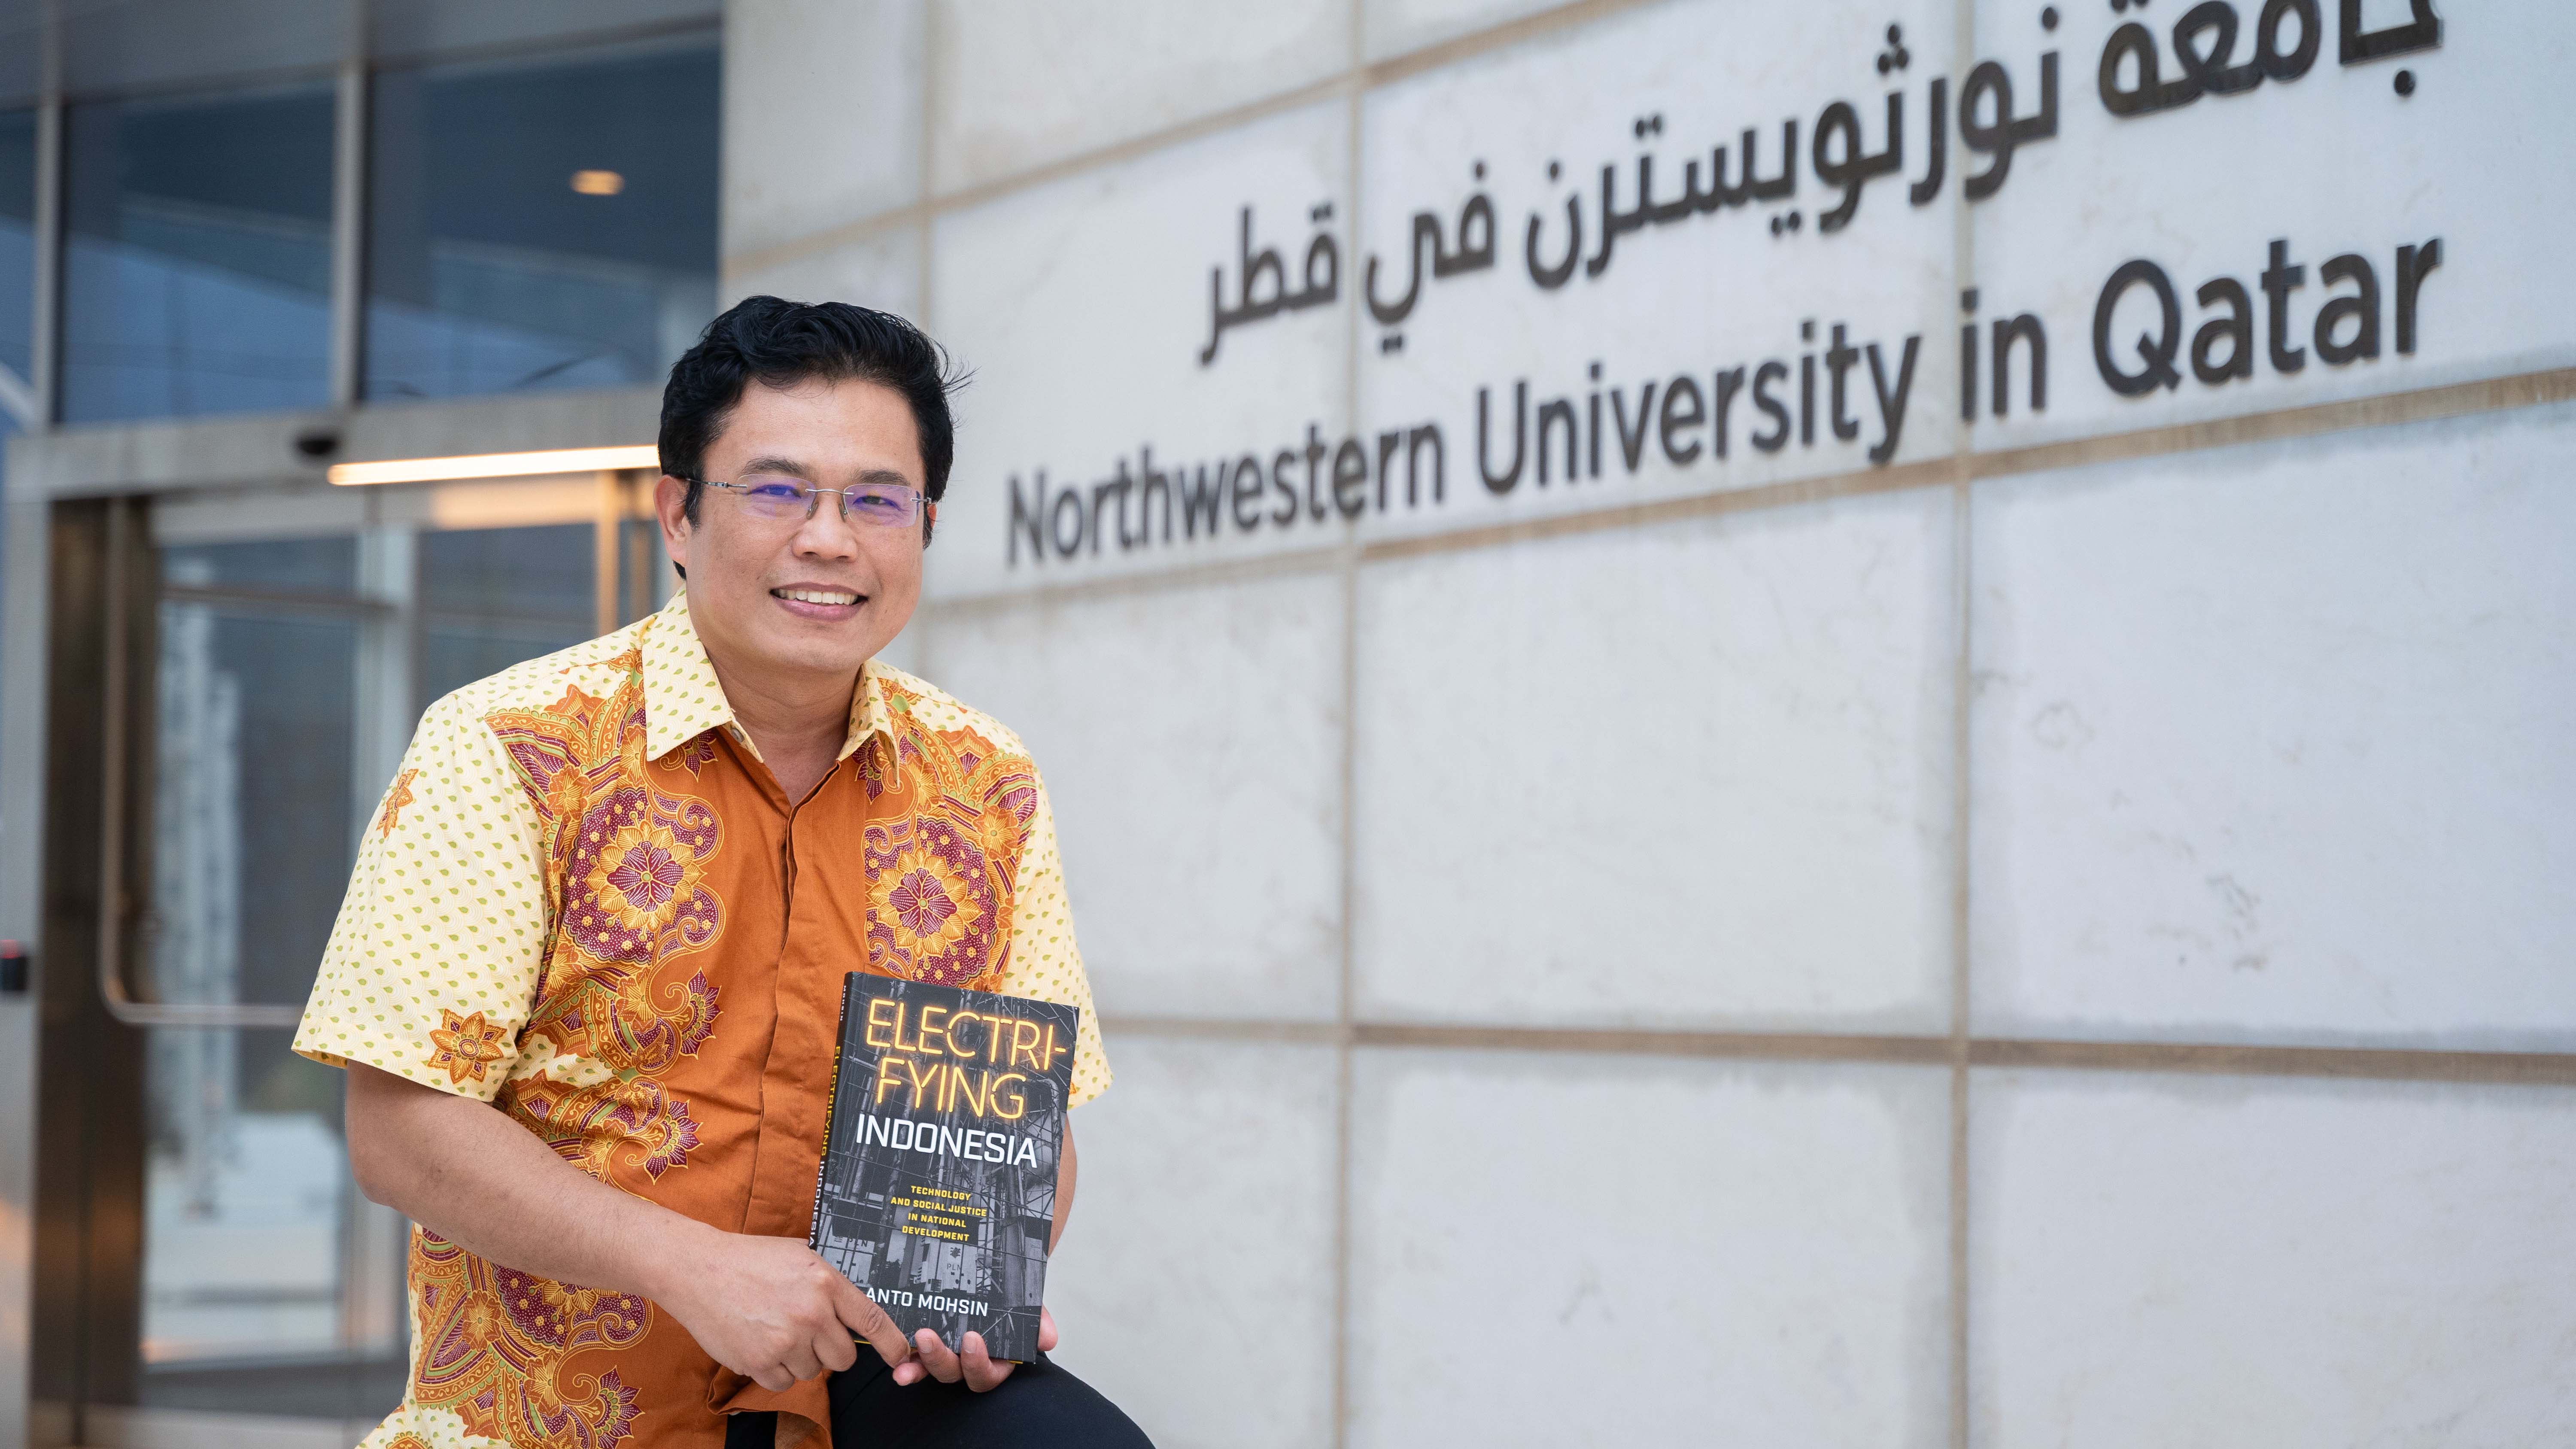 "Electrifying Indonesia" is Anto Mohsin's first book and the latest addition to Northwestern Qatar faculty’s research and scholarly productions